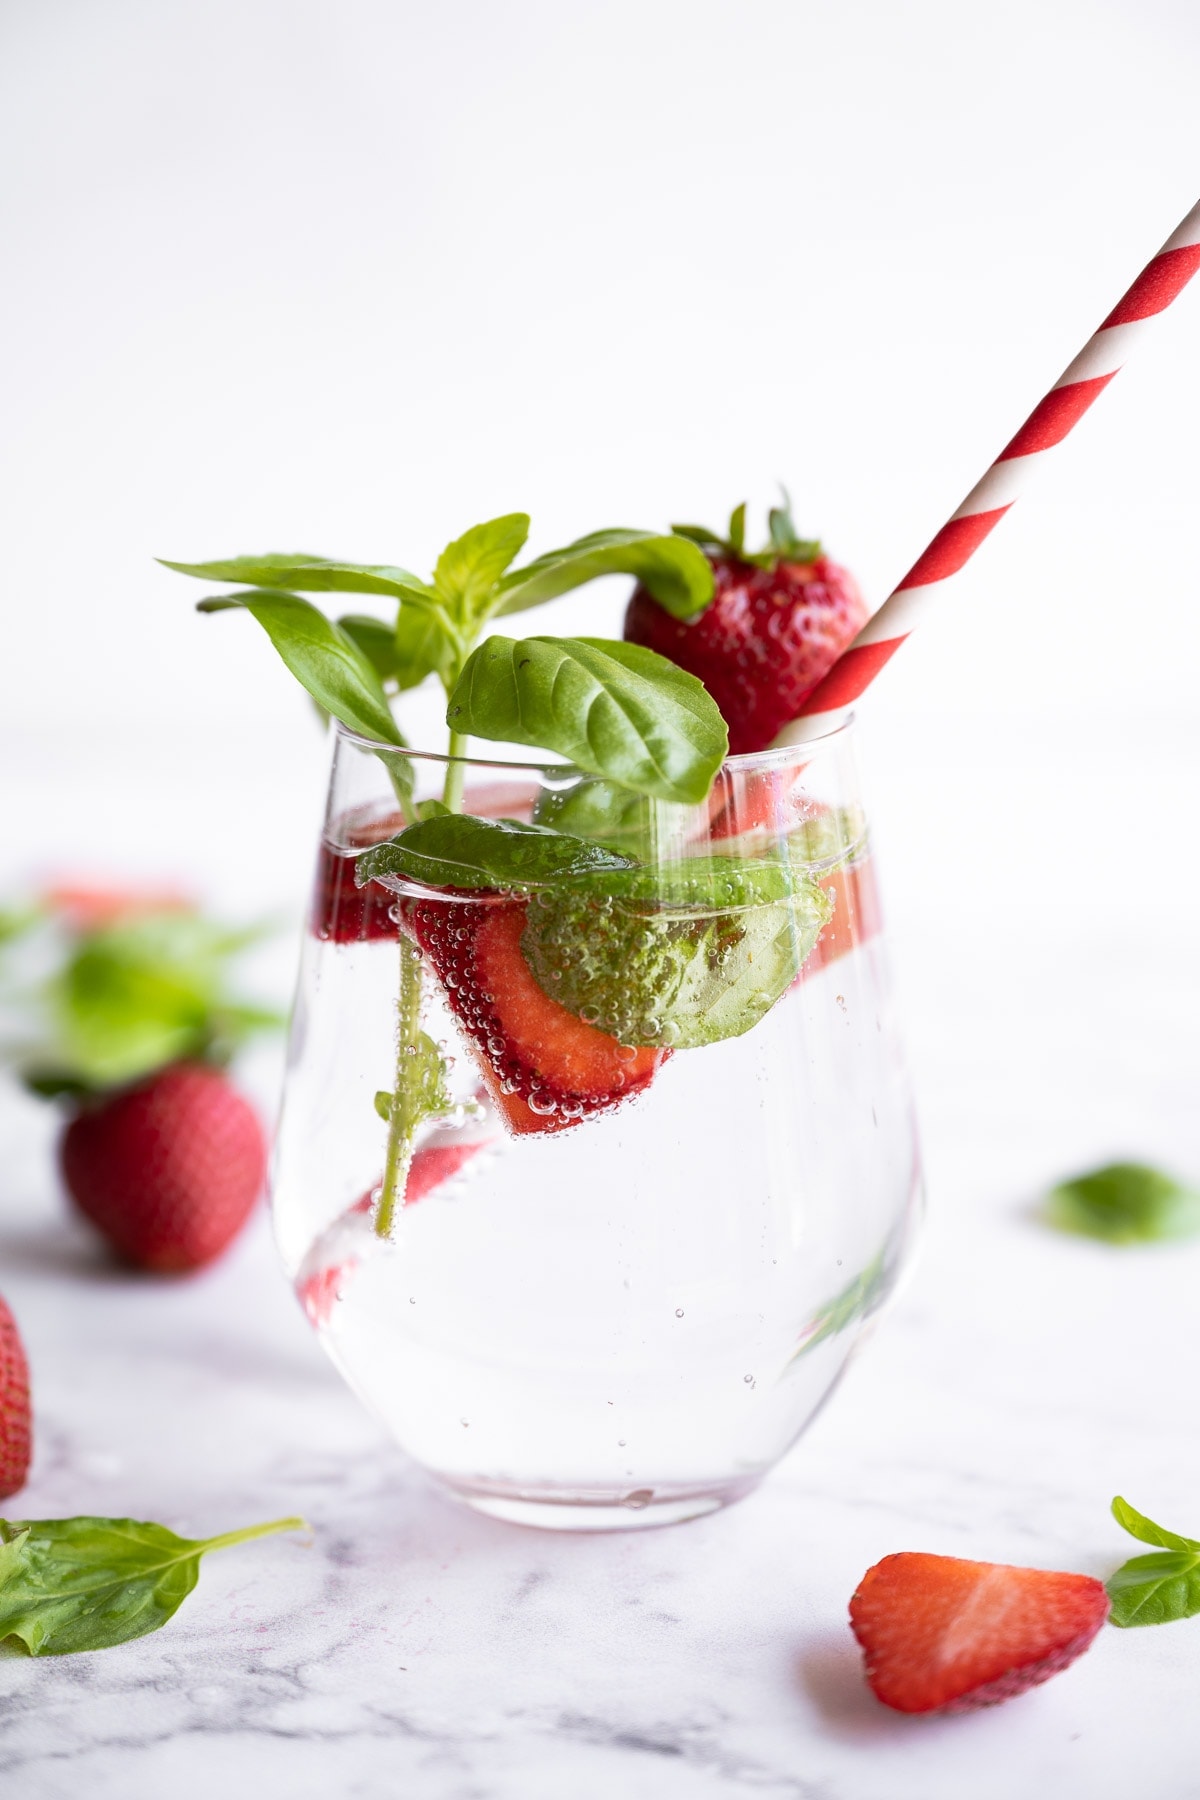 Strawberries and basil fruit infused water in a glass with a red striped straw.